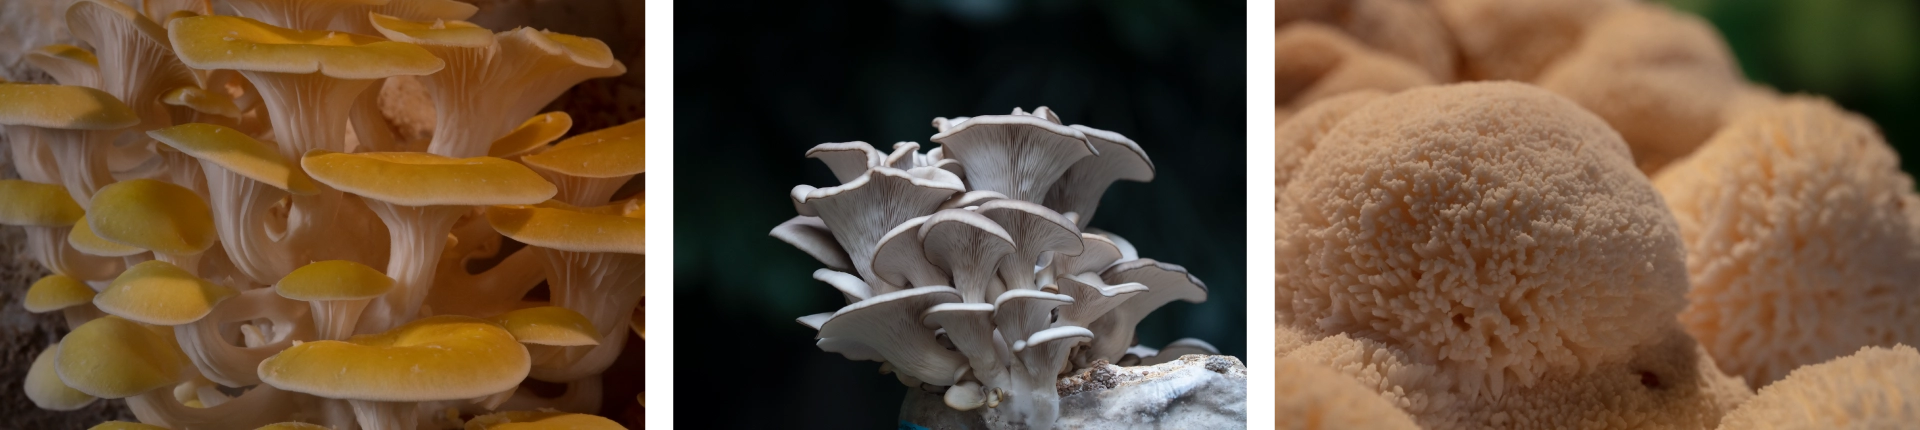 Photography of mushrooms by Louie Schwartzberg